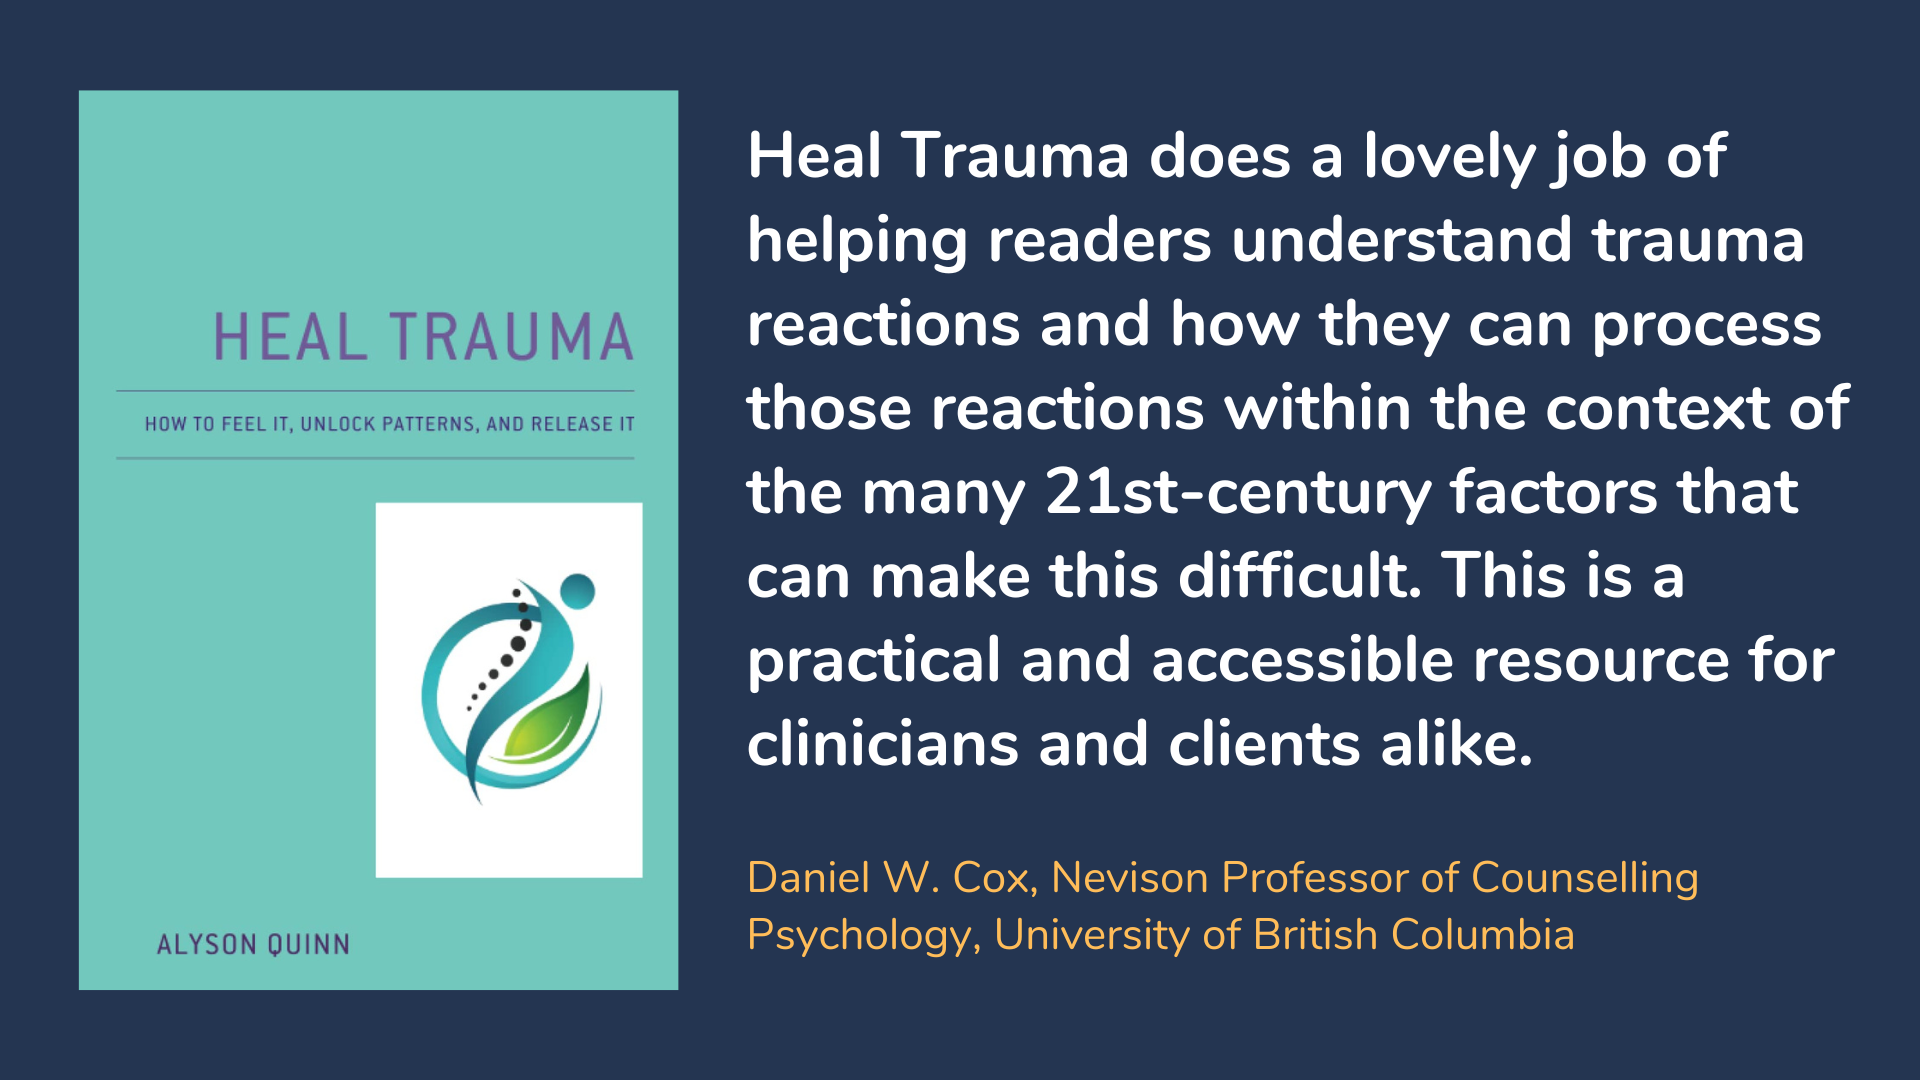 Heal Trauma: How to Feel It, Unlock Patterns and Release It, book cover and description.